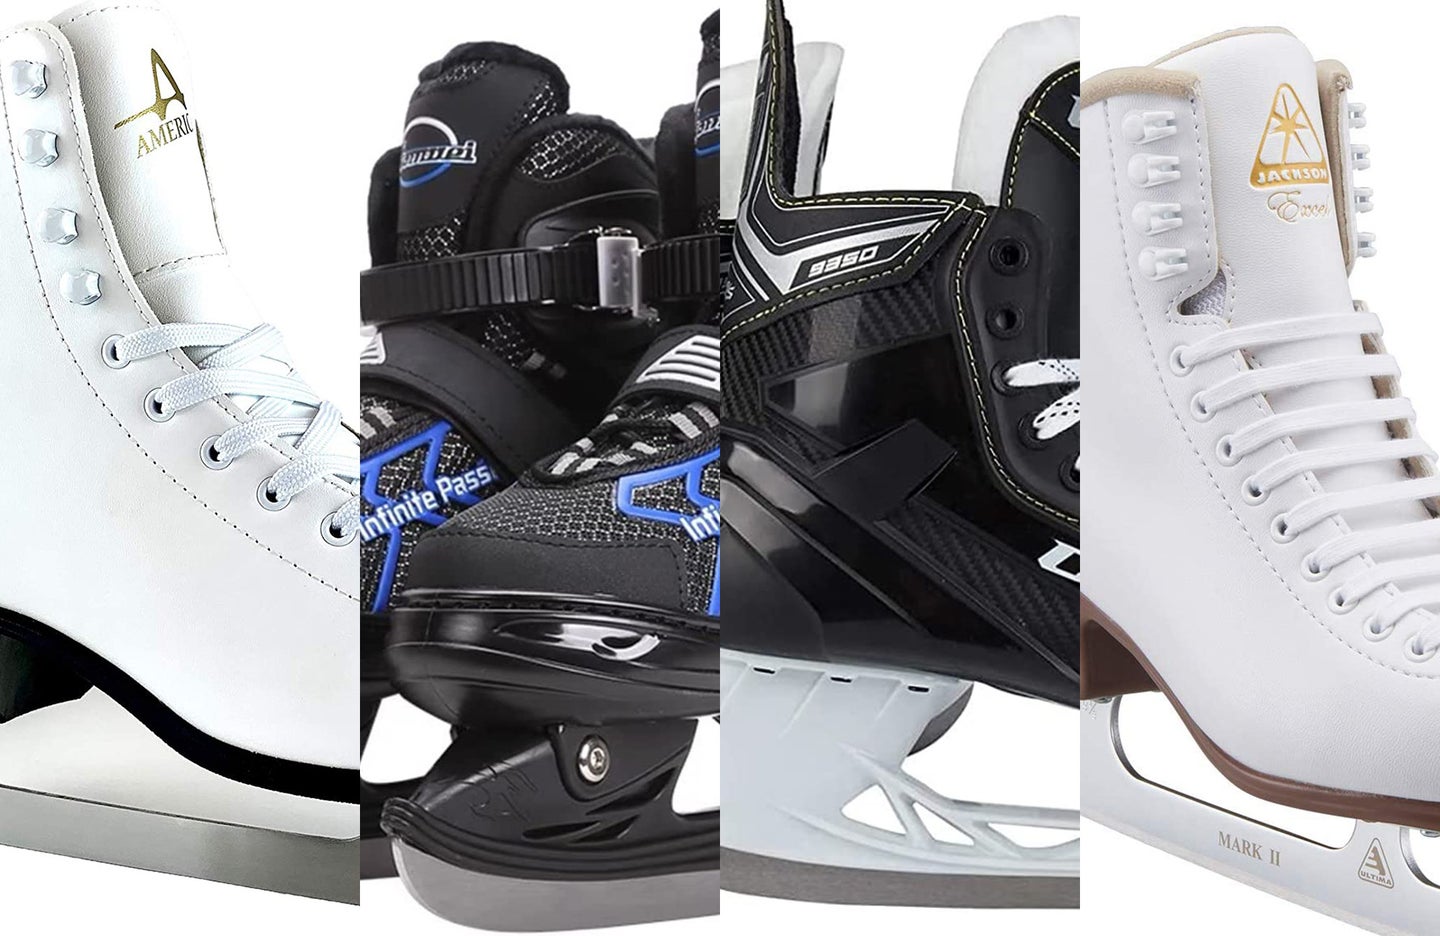 A lineup of the best ice skates on a white background